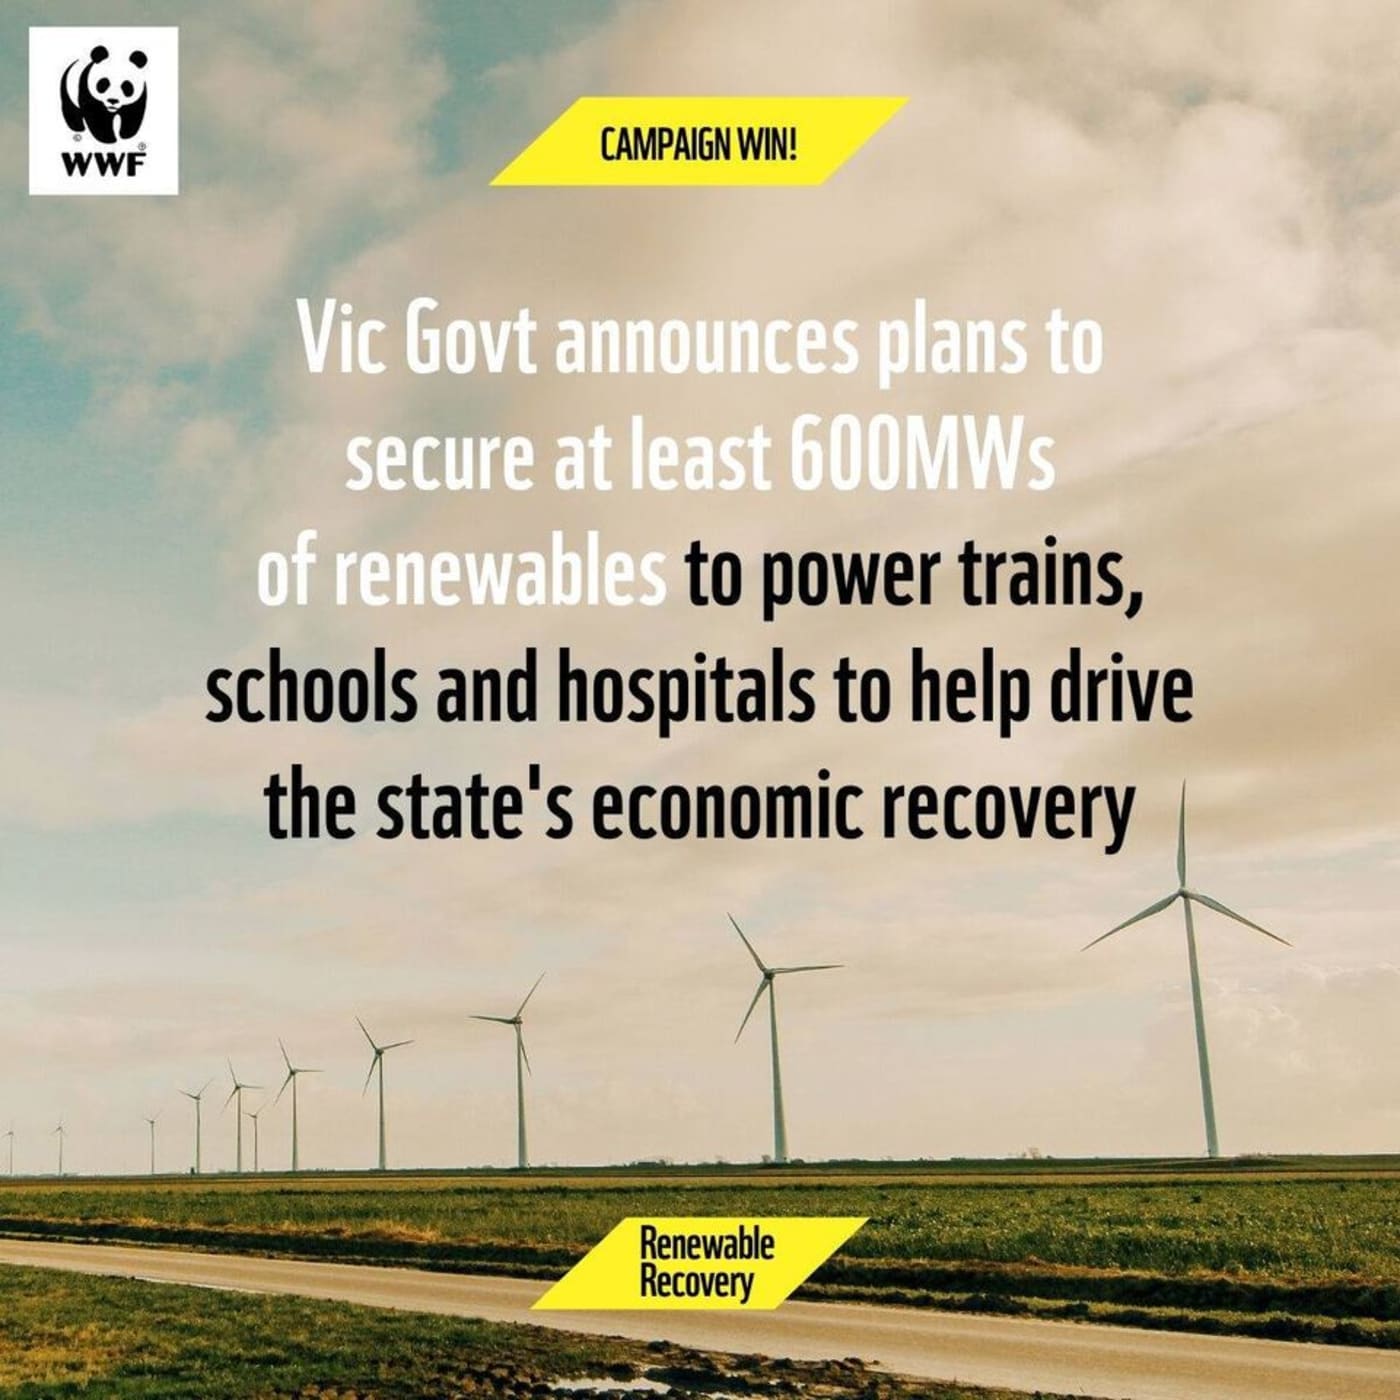 #RenewableRecovery Campaign win VIC